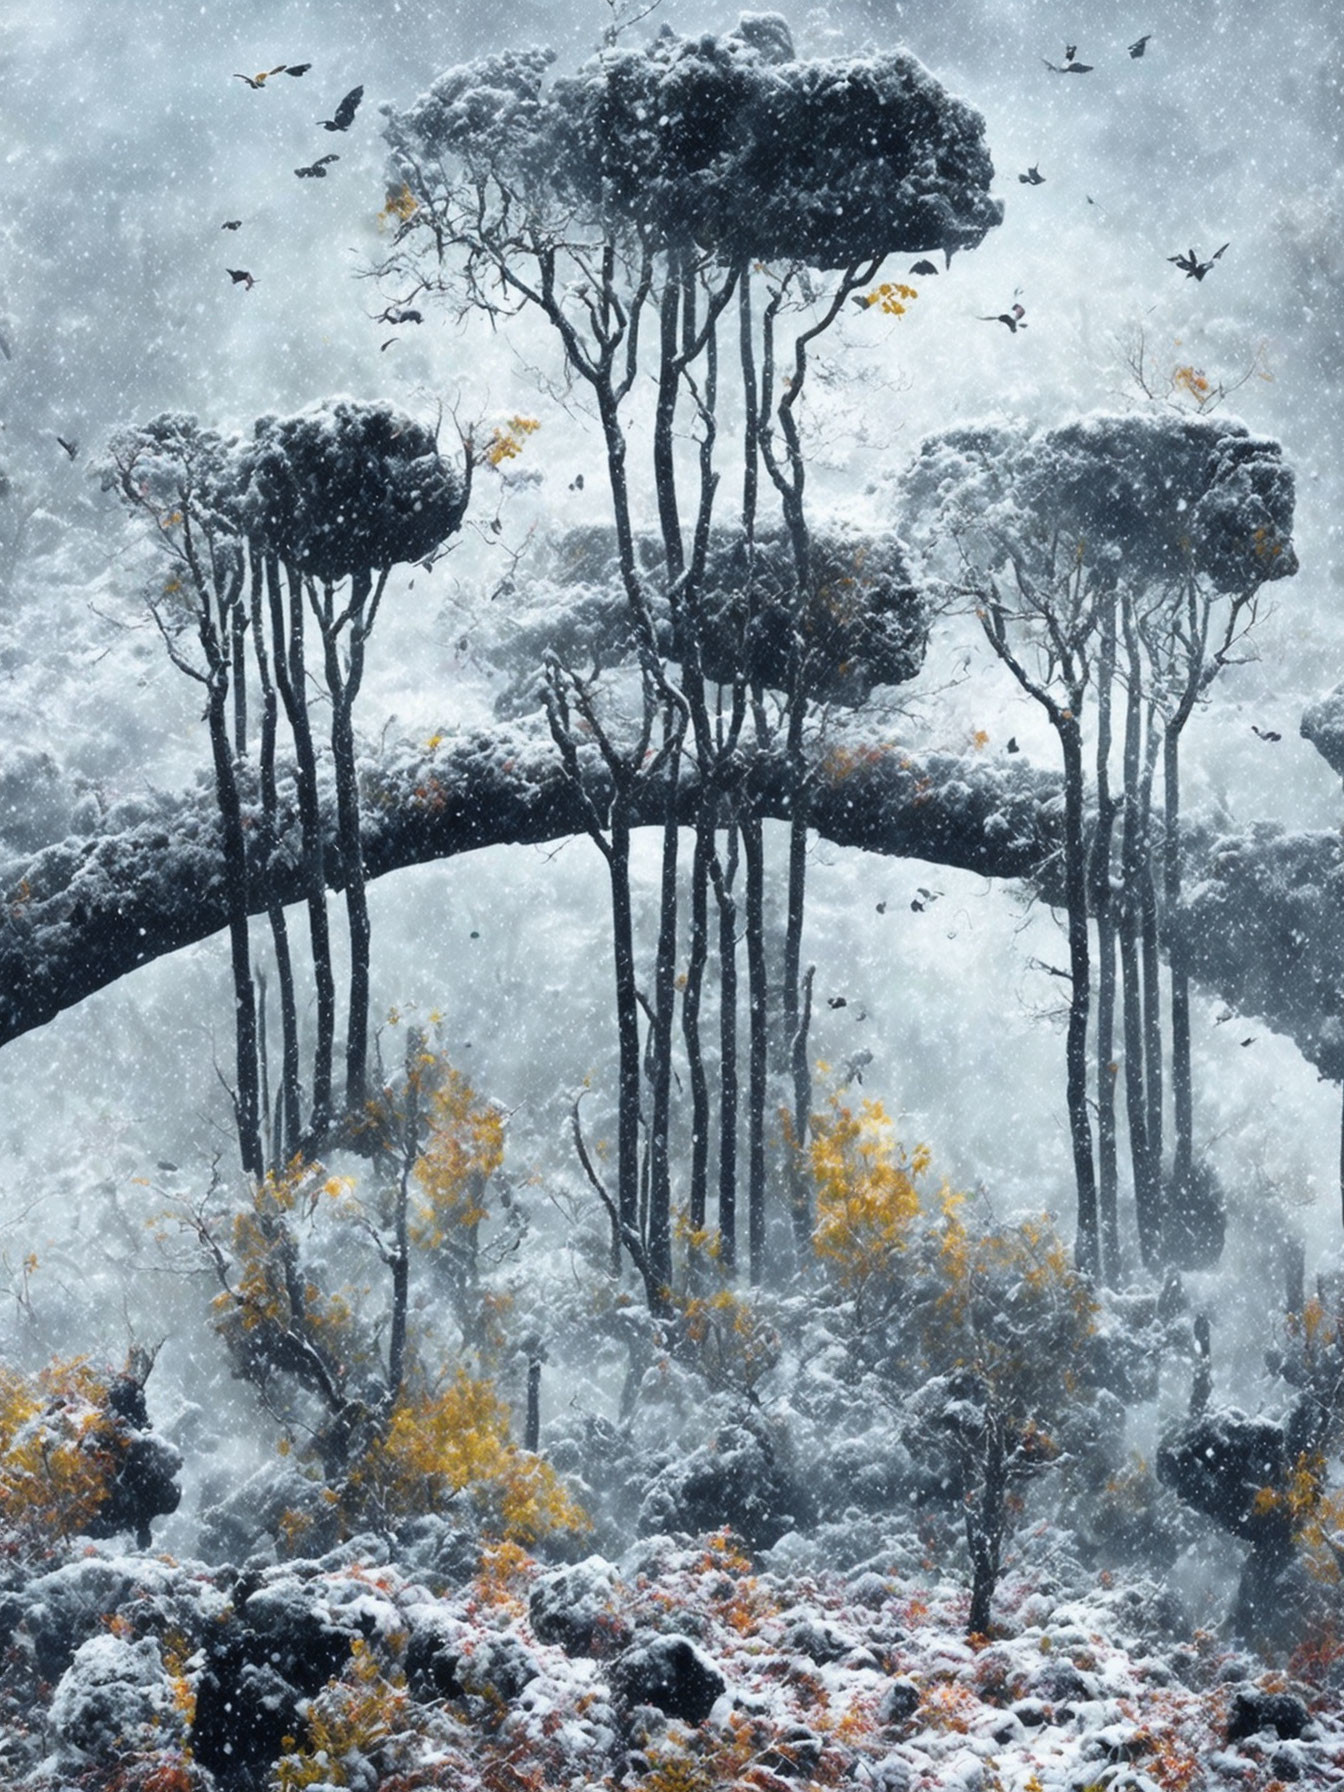 Mystical winter forest with tall trees, arching branches, flying birds, and snow-covered under